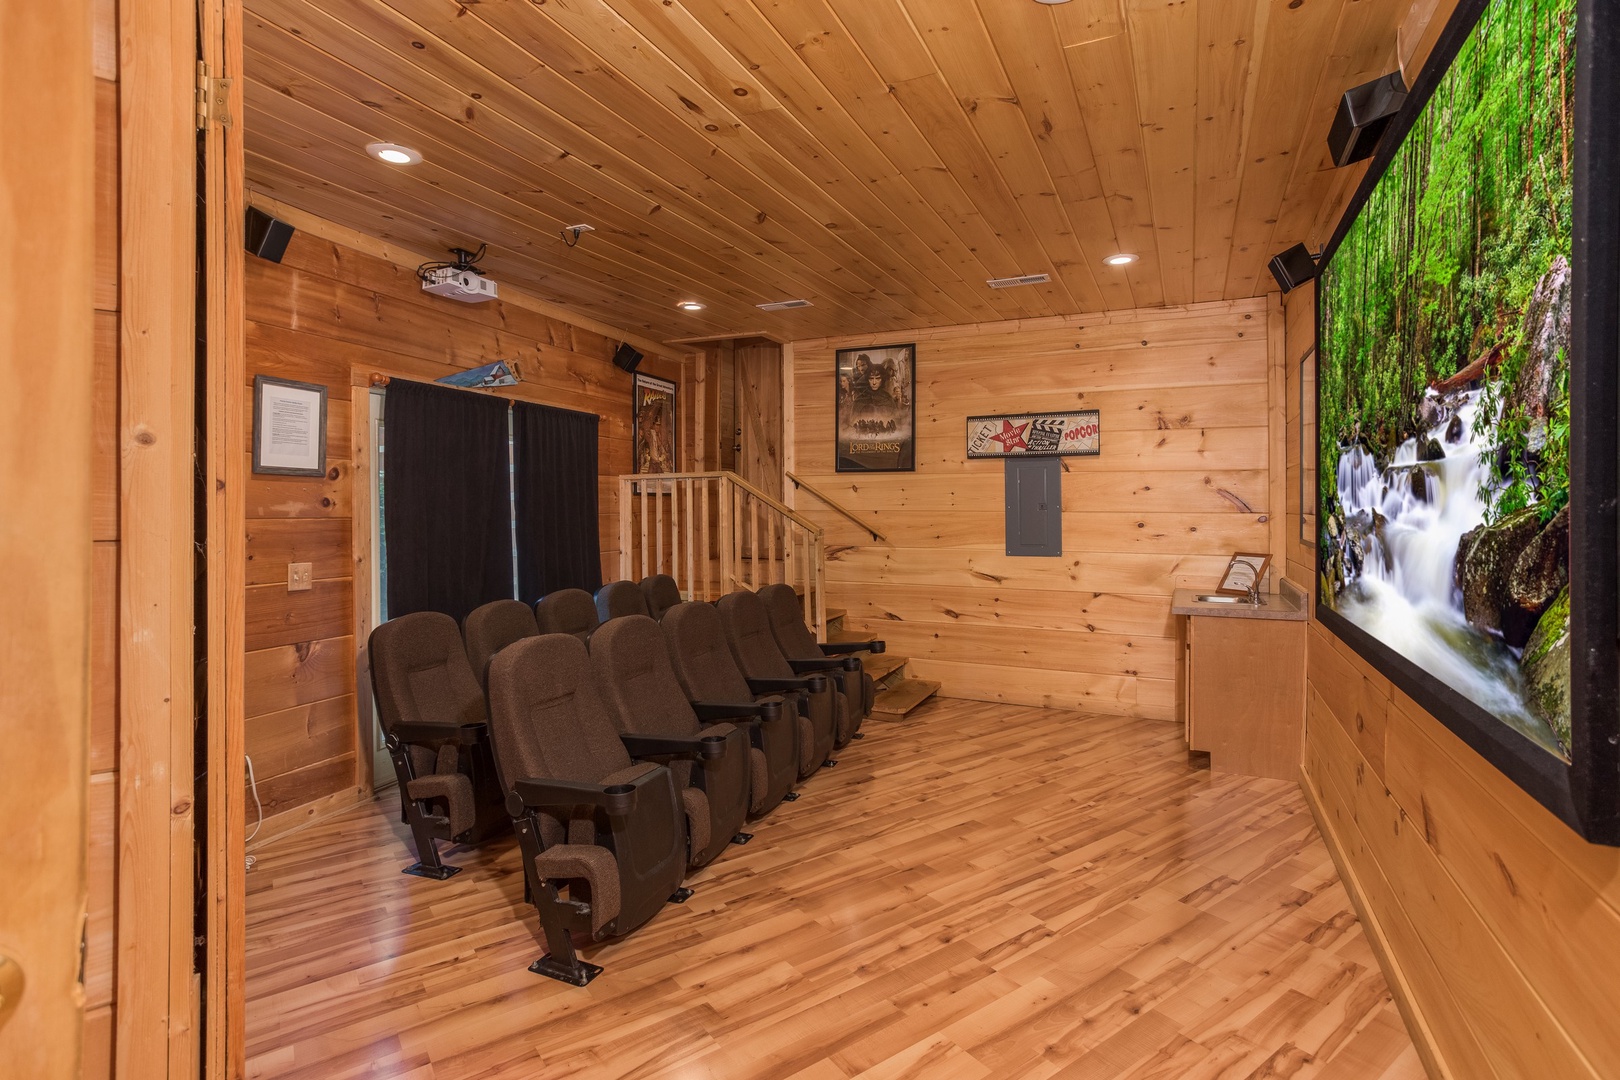 Seating in the theater room at Patriot Pointe, a 5 bedroom cabin rental located in Pigeon Forge